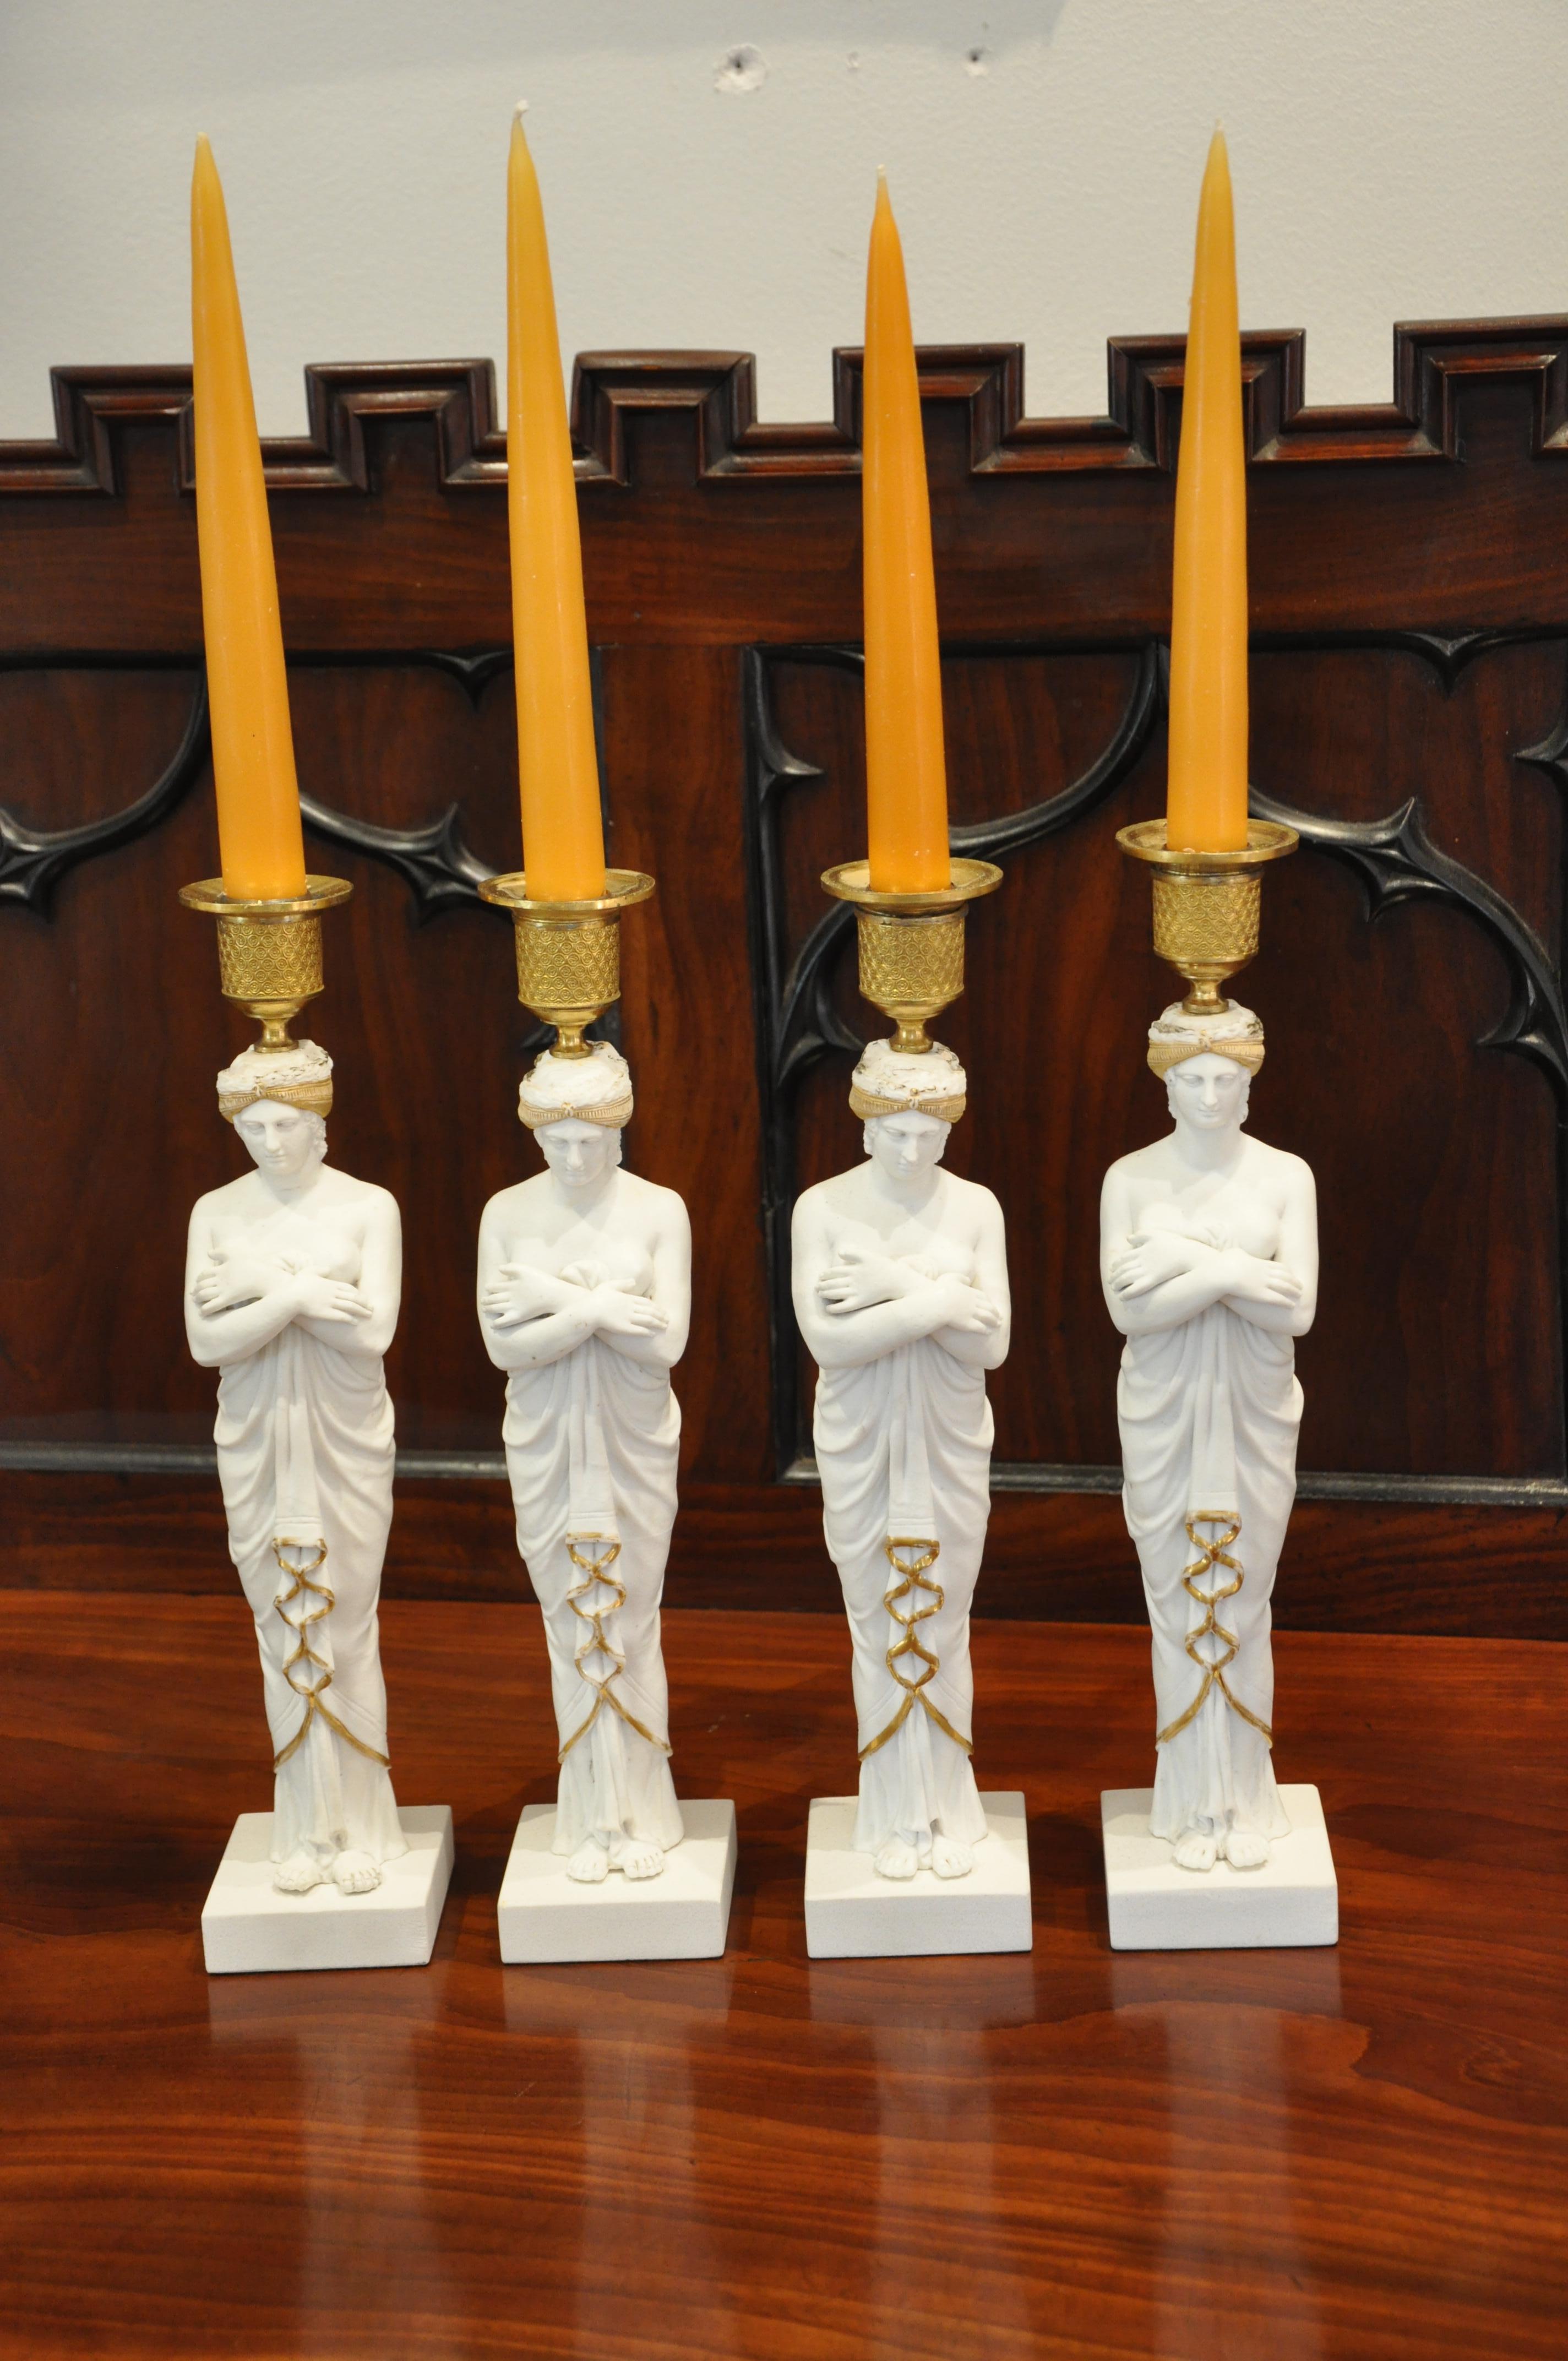 Set of four old Paris bisque porcelain caryatids as candlesticks

Early 19th century biscuit porcelain figural caryatids with arms crossed on bases with ormolu candle cups on head. Neoclassical or French Empire.